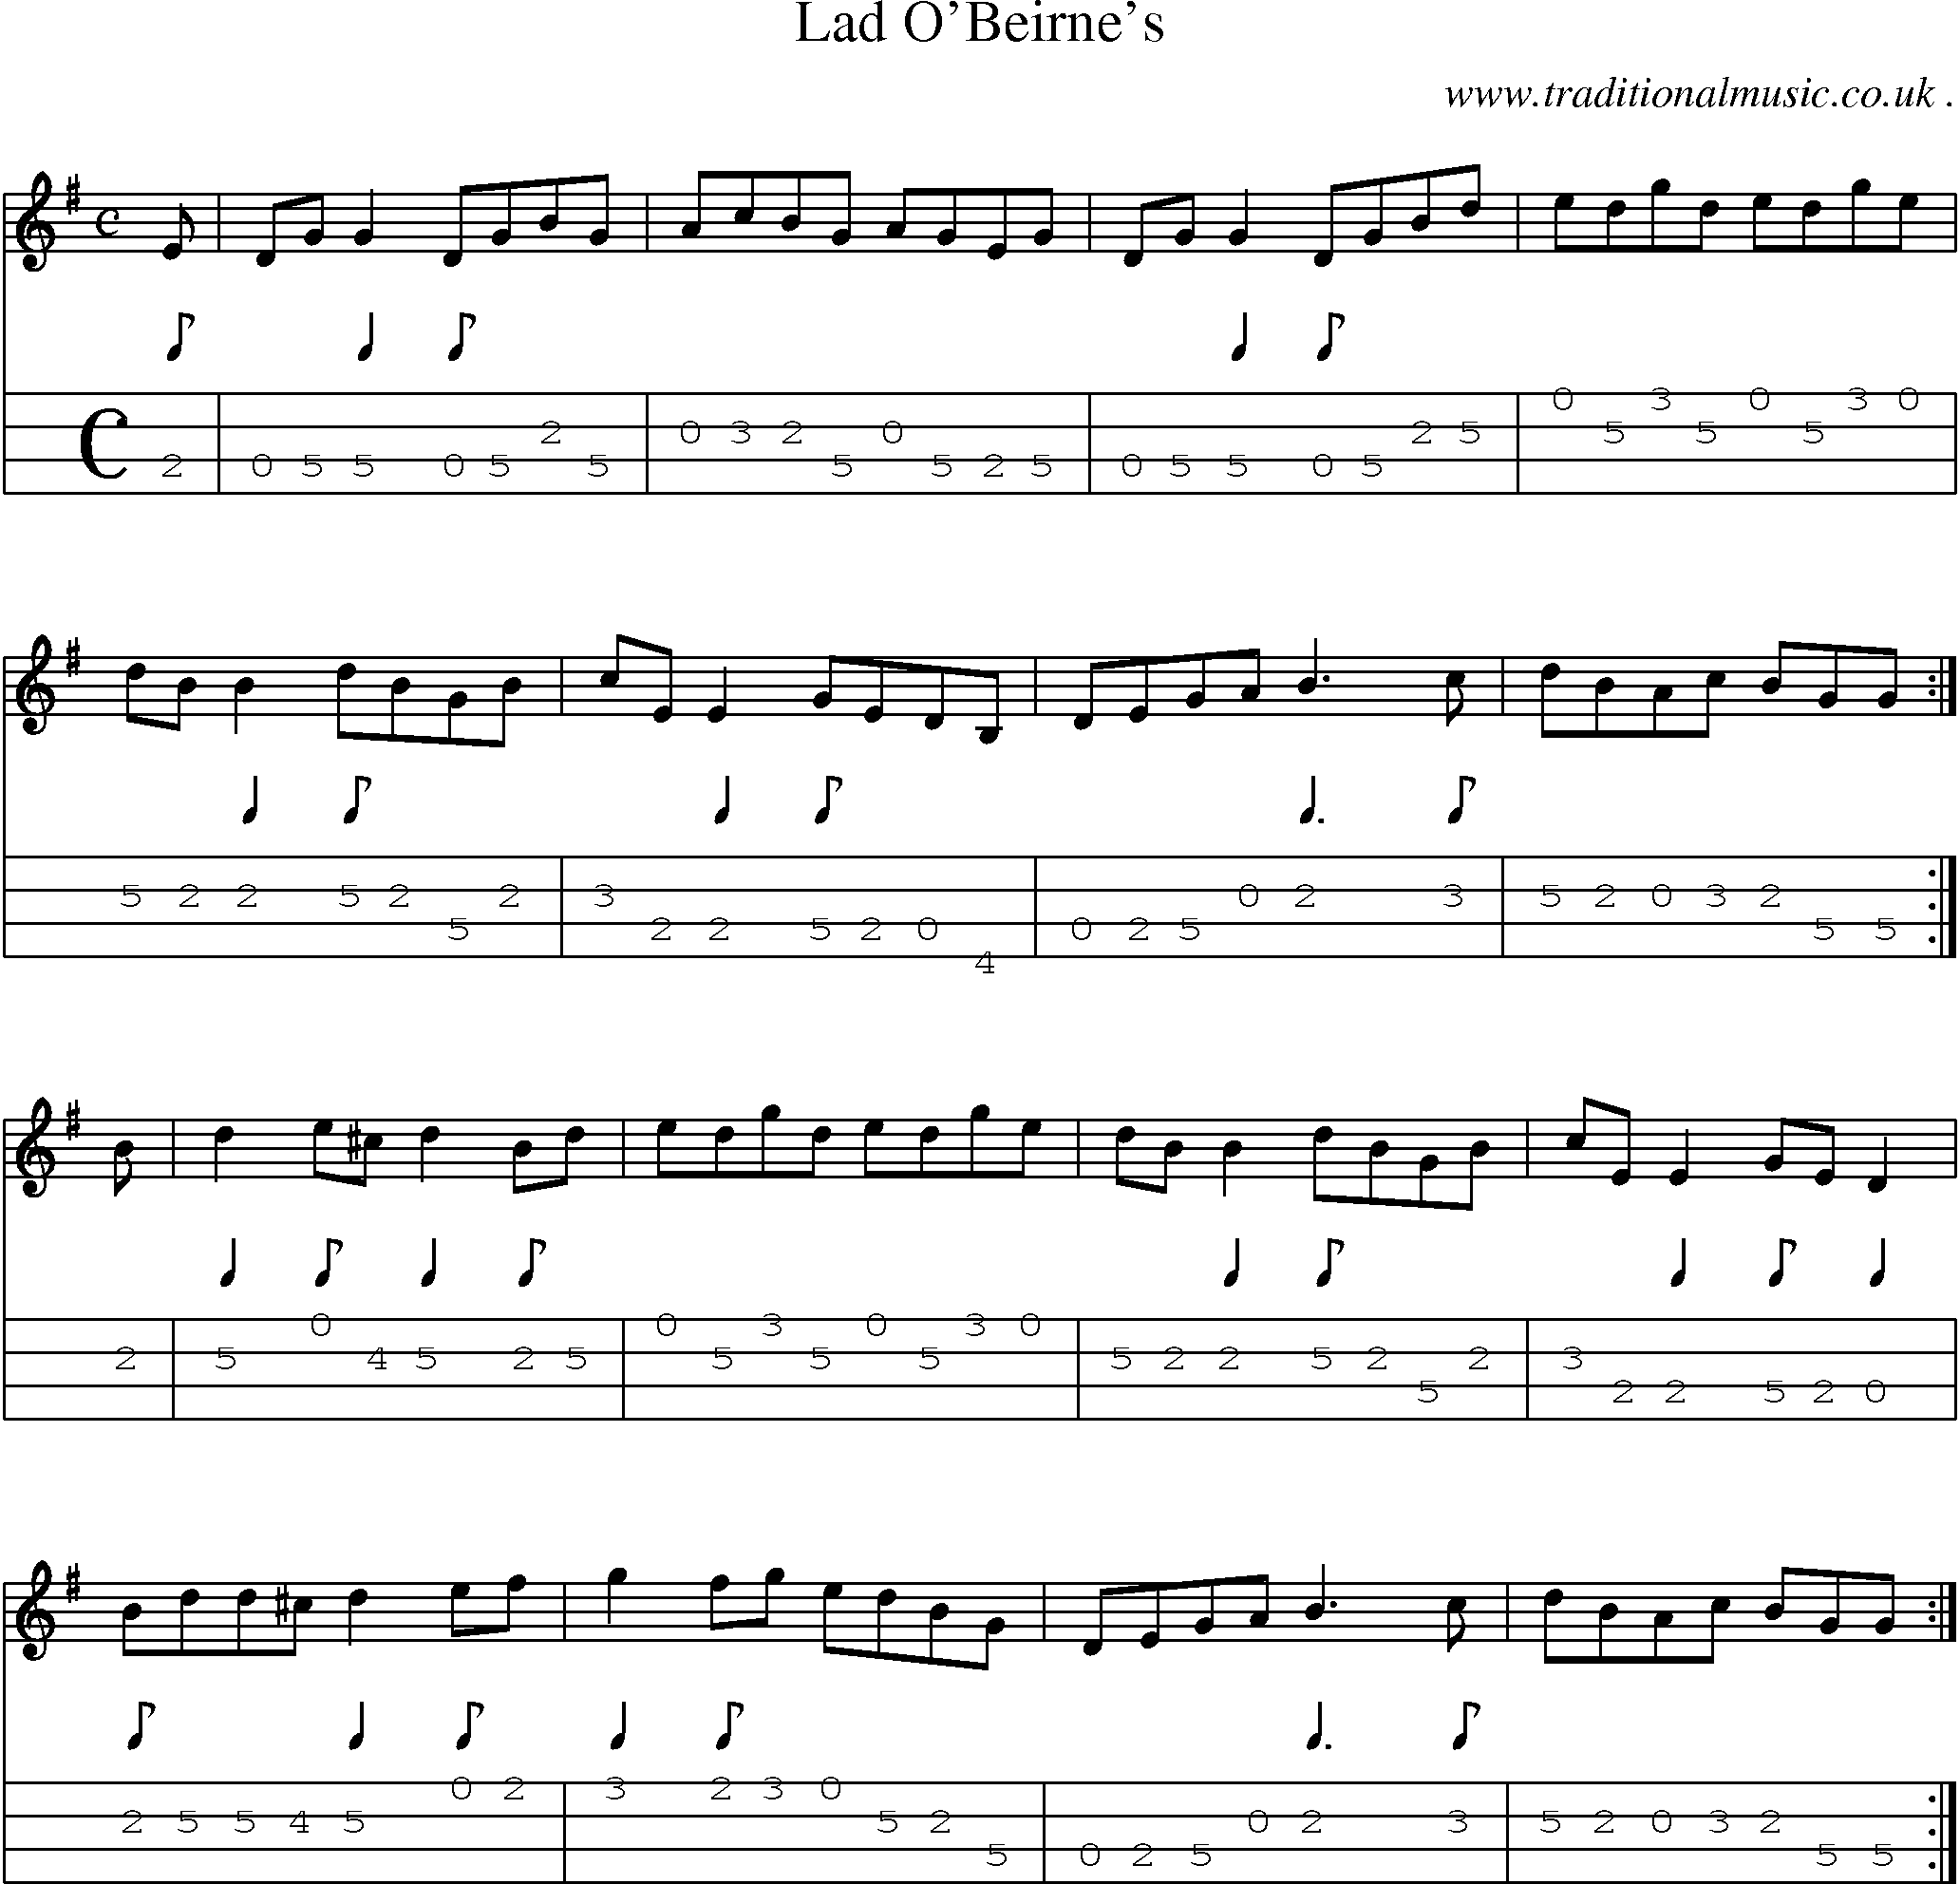 Sheet-Music and Mandolin Tabs for Lad Obeirnes